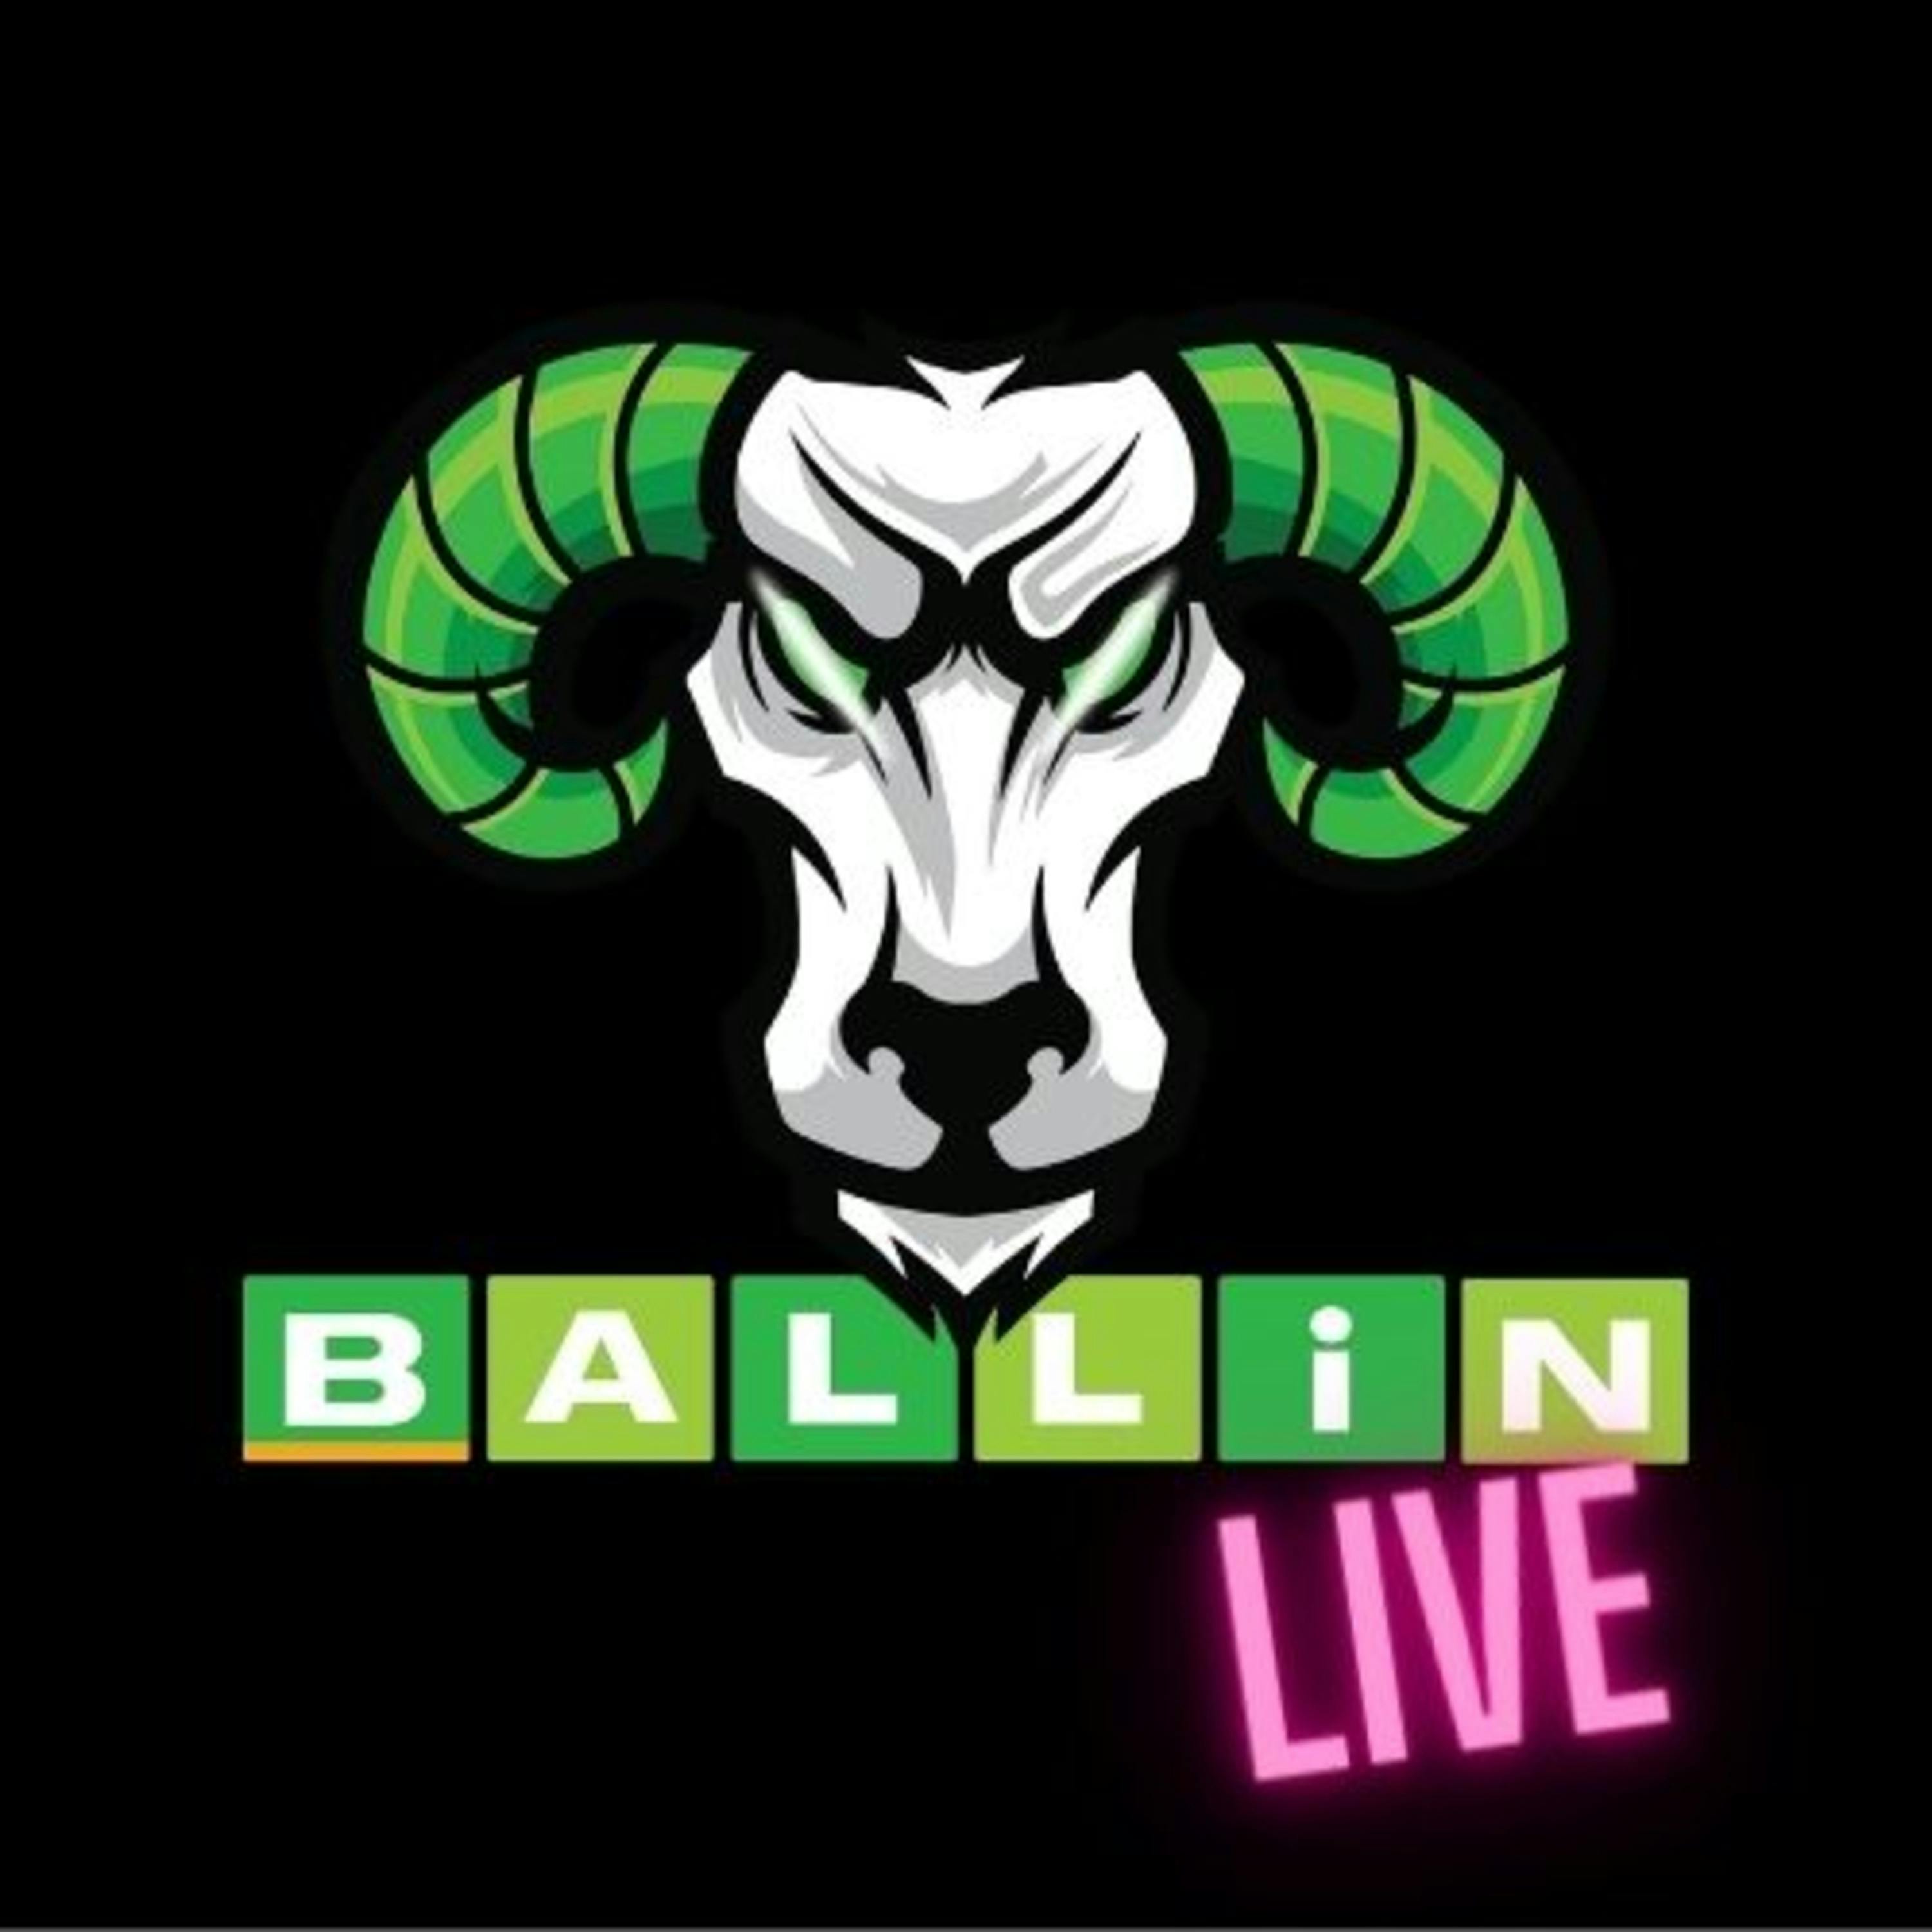 ONE LAST SWiNG AT $25K | One of The Last FFPC Never=Too-Early Best Ball Tournament Drafts | BALLiN LiVE